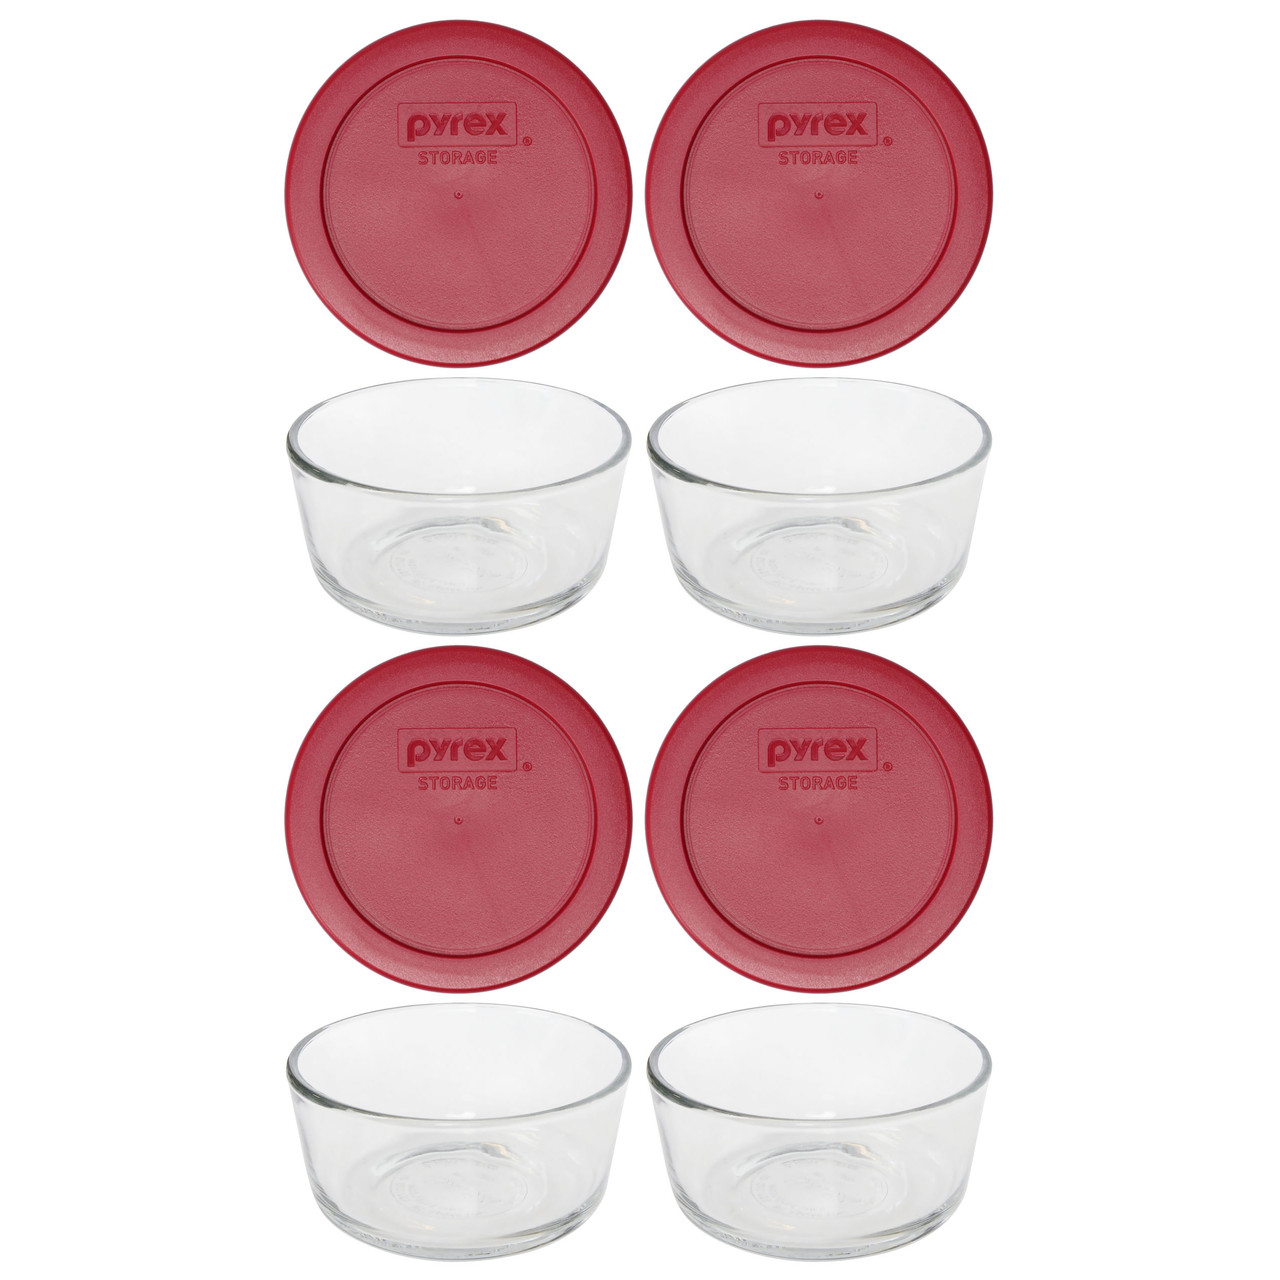 Pyrex Simply Store Glass Storage, 2 Cup